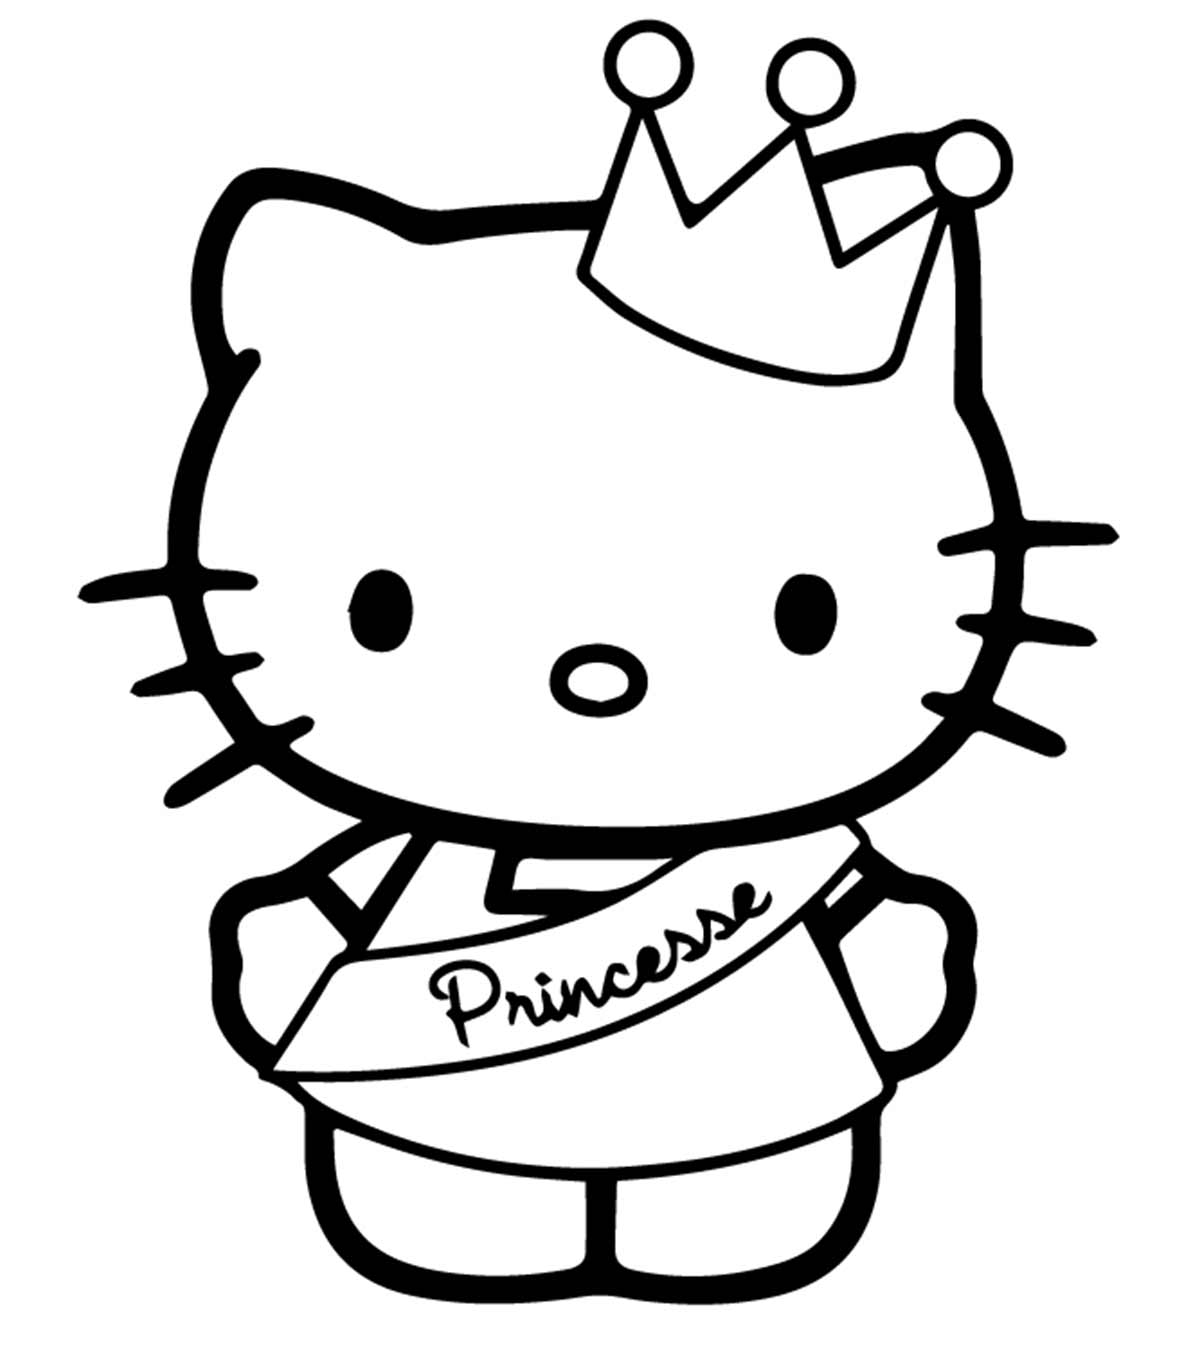 Top 30 Crowns Coloring Pages for Your Little Ones_image